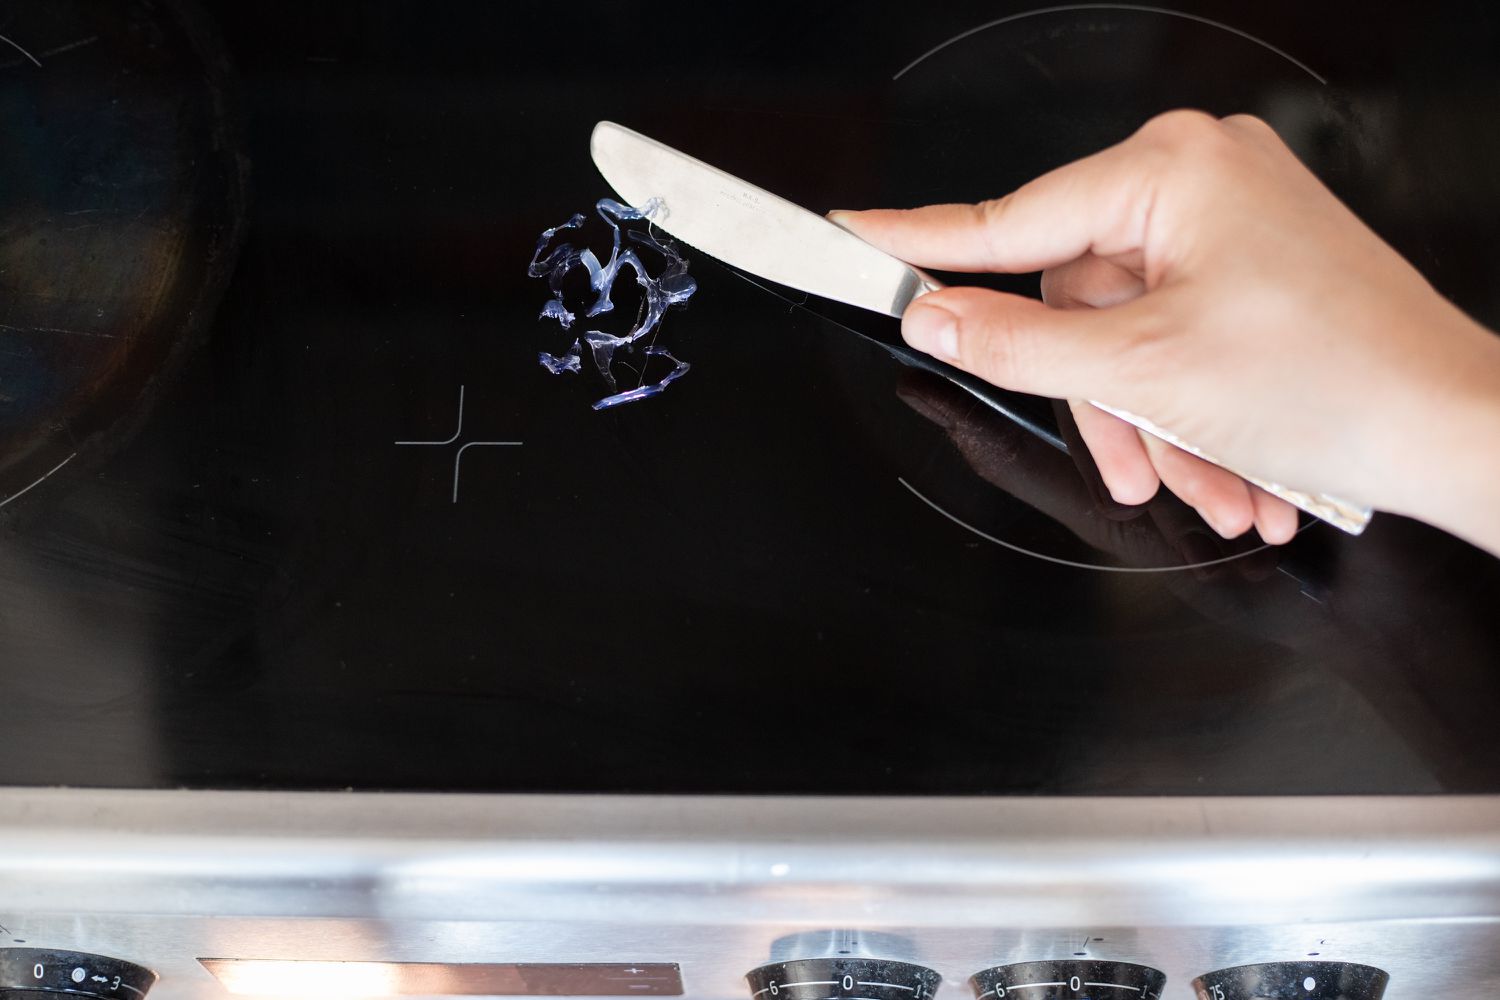 How To Remove Burnt Plastic On Electric Stove Burners